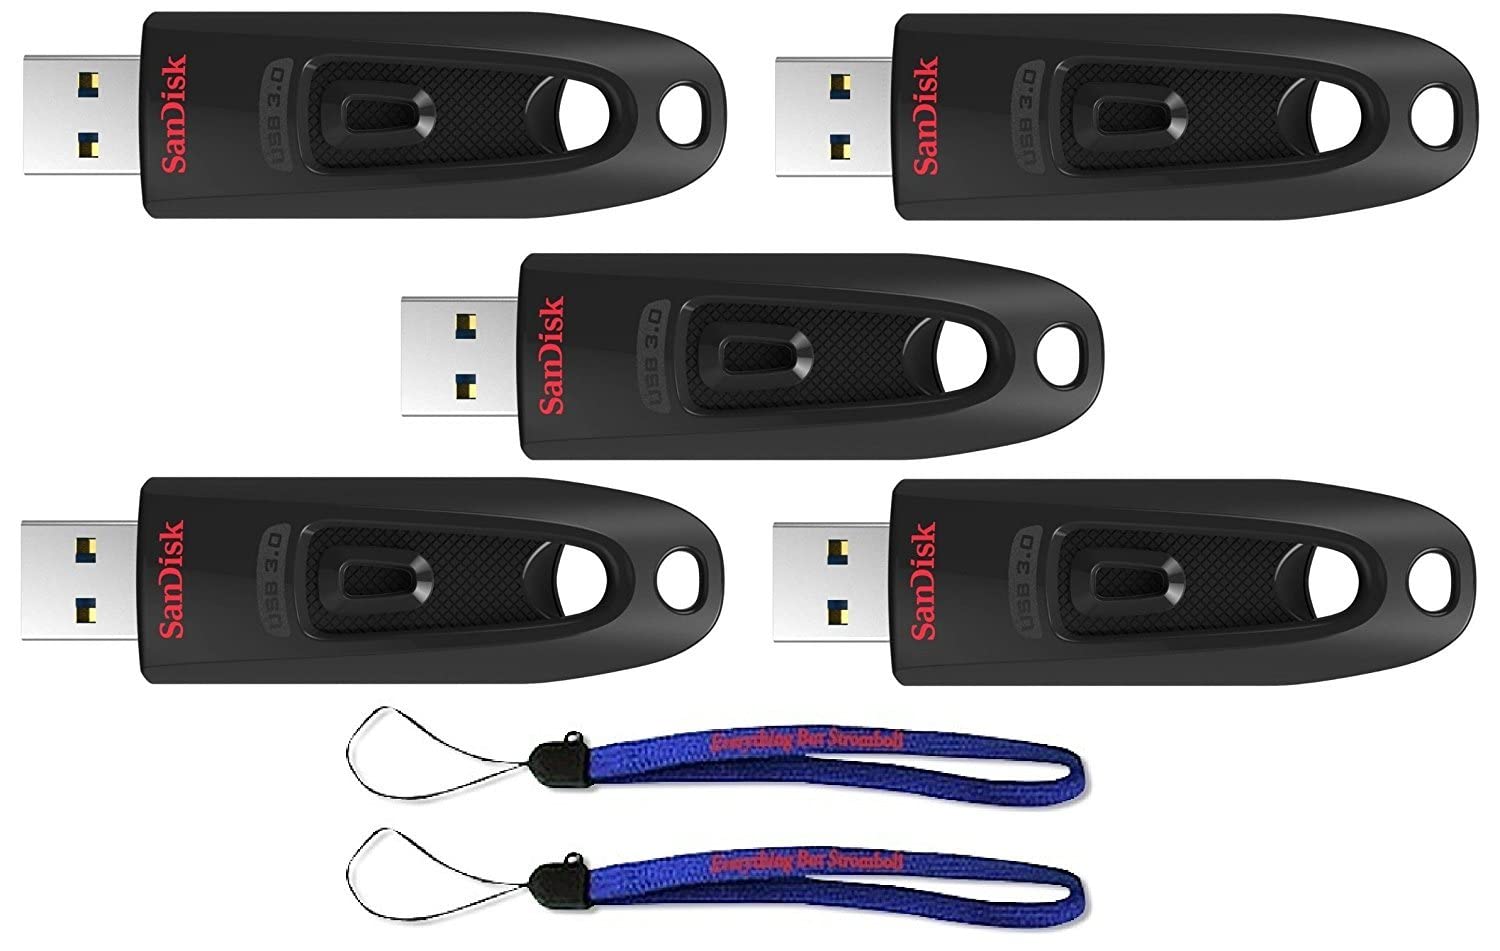 Book Cover SanDisk Ultra USB (5 Pack) 3.0 64GB CZ48 Flash Drive High Performance Jump Drive/Thumb Drive/Pen Drive up to 100MB/s - with (2) Everything But Stromboli (tm) Lanyard 64GB 5 Pack